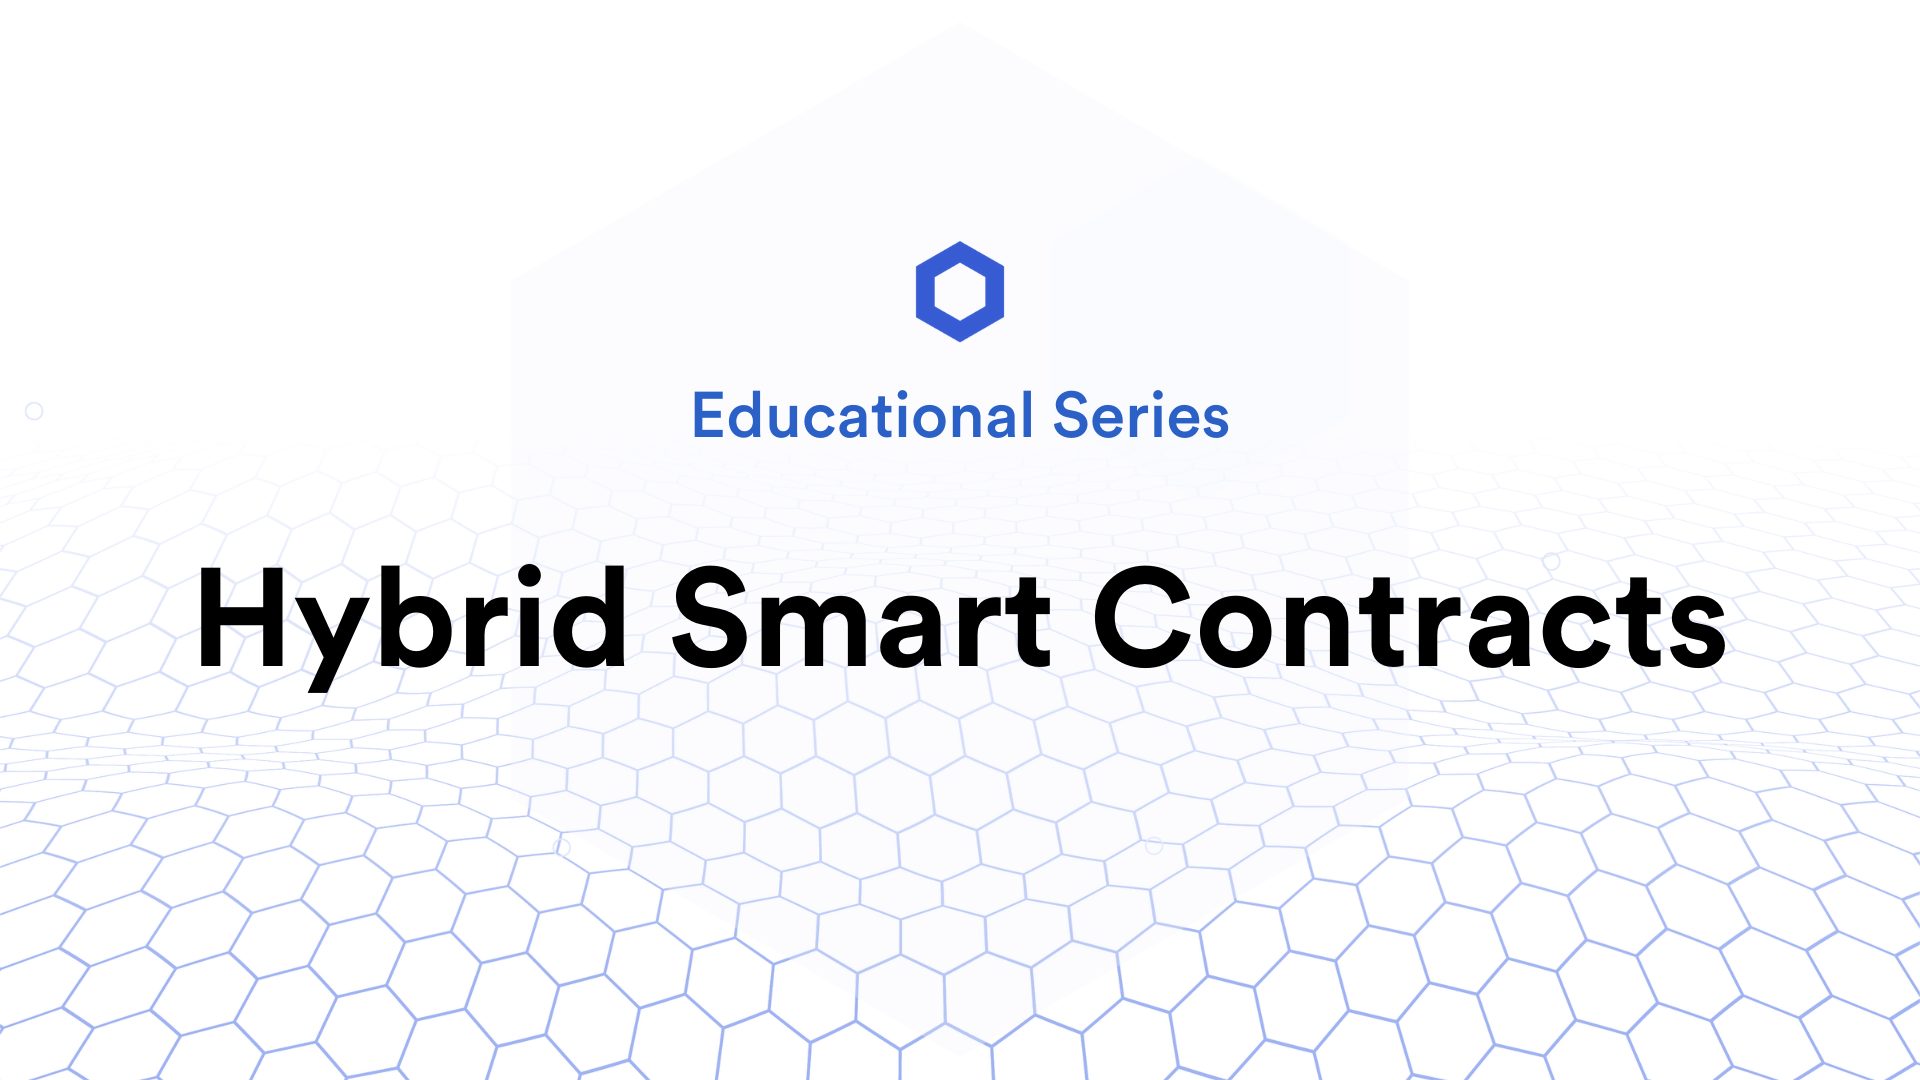 Hybrid Smart Contracts by Chainlink